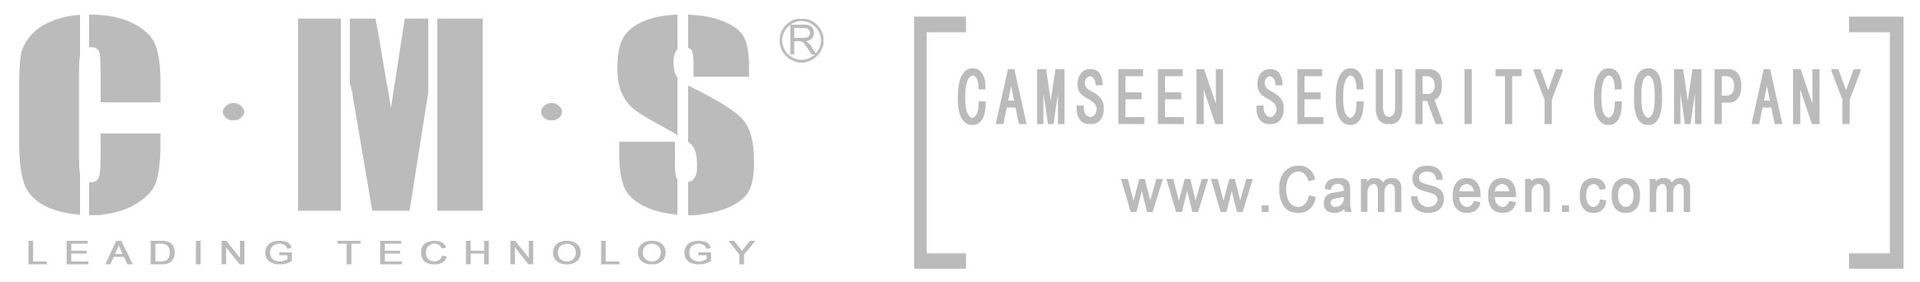 Camseen Security Limited (CMS) Main Image